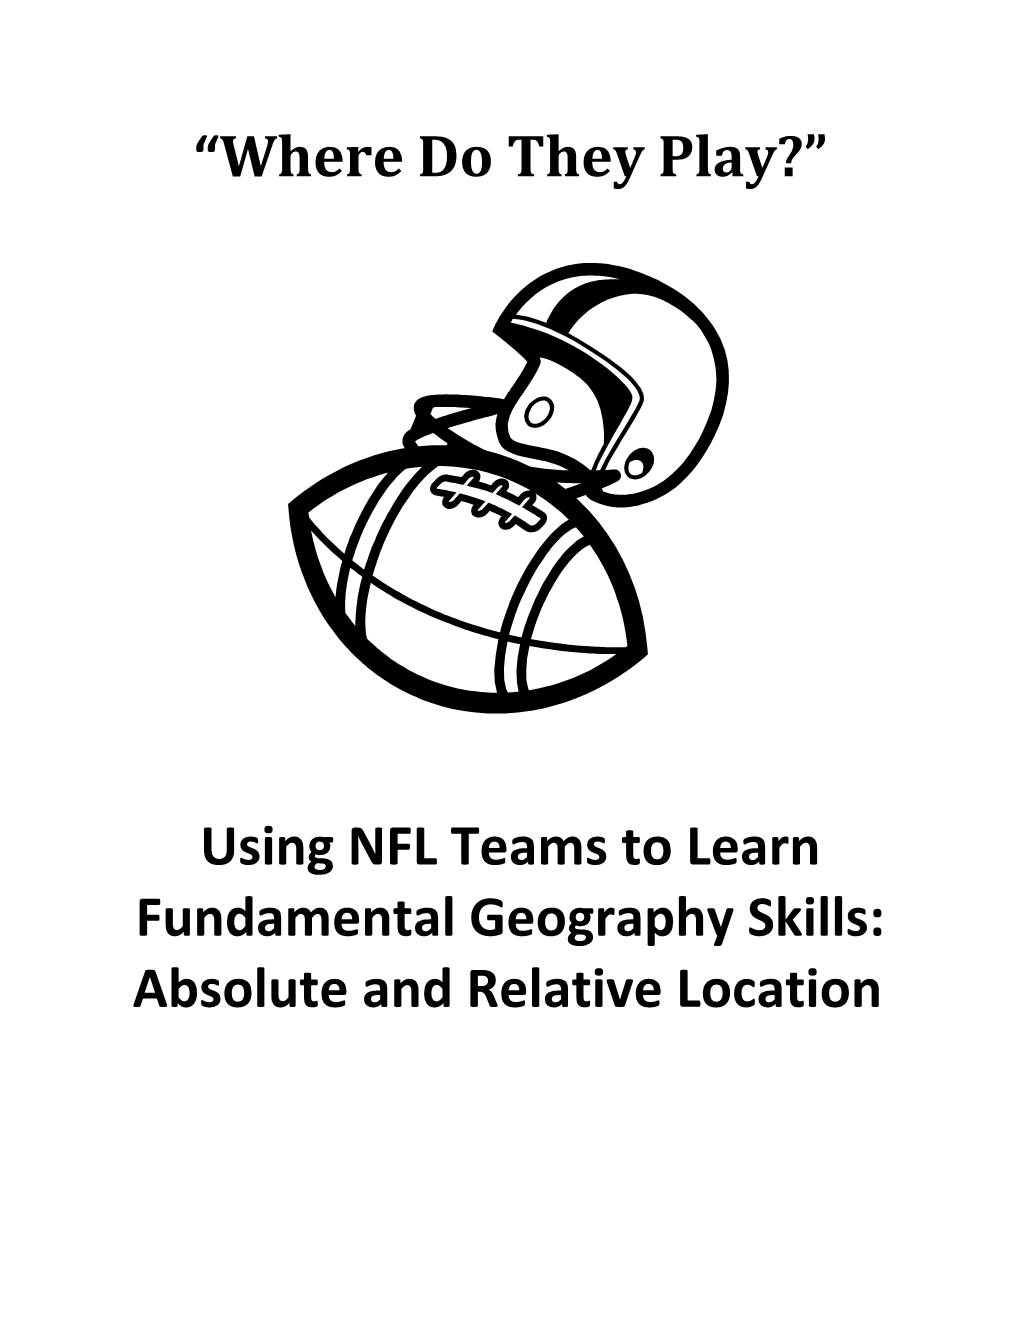 Where Do They Play? Using NFL Teams to Learn Absolute and Relative Location